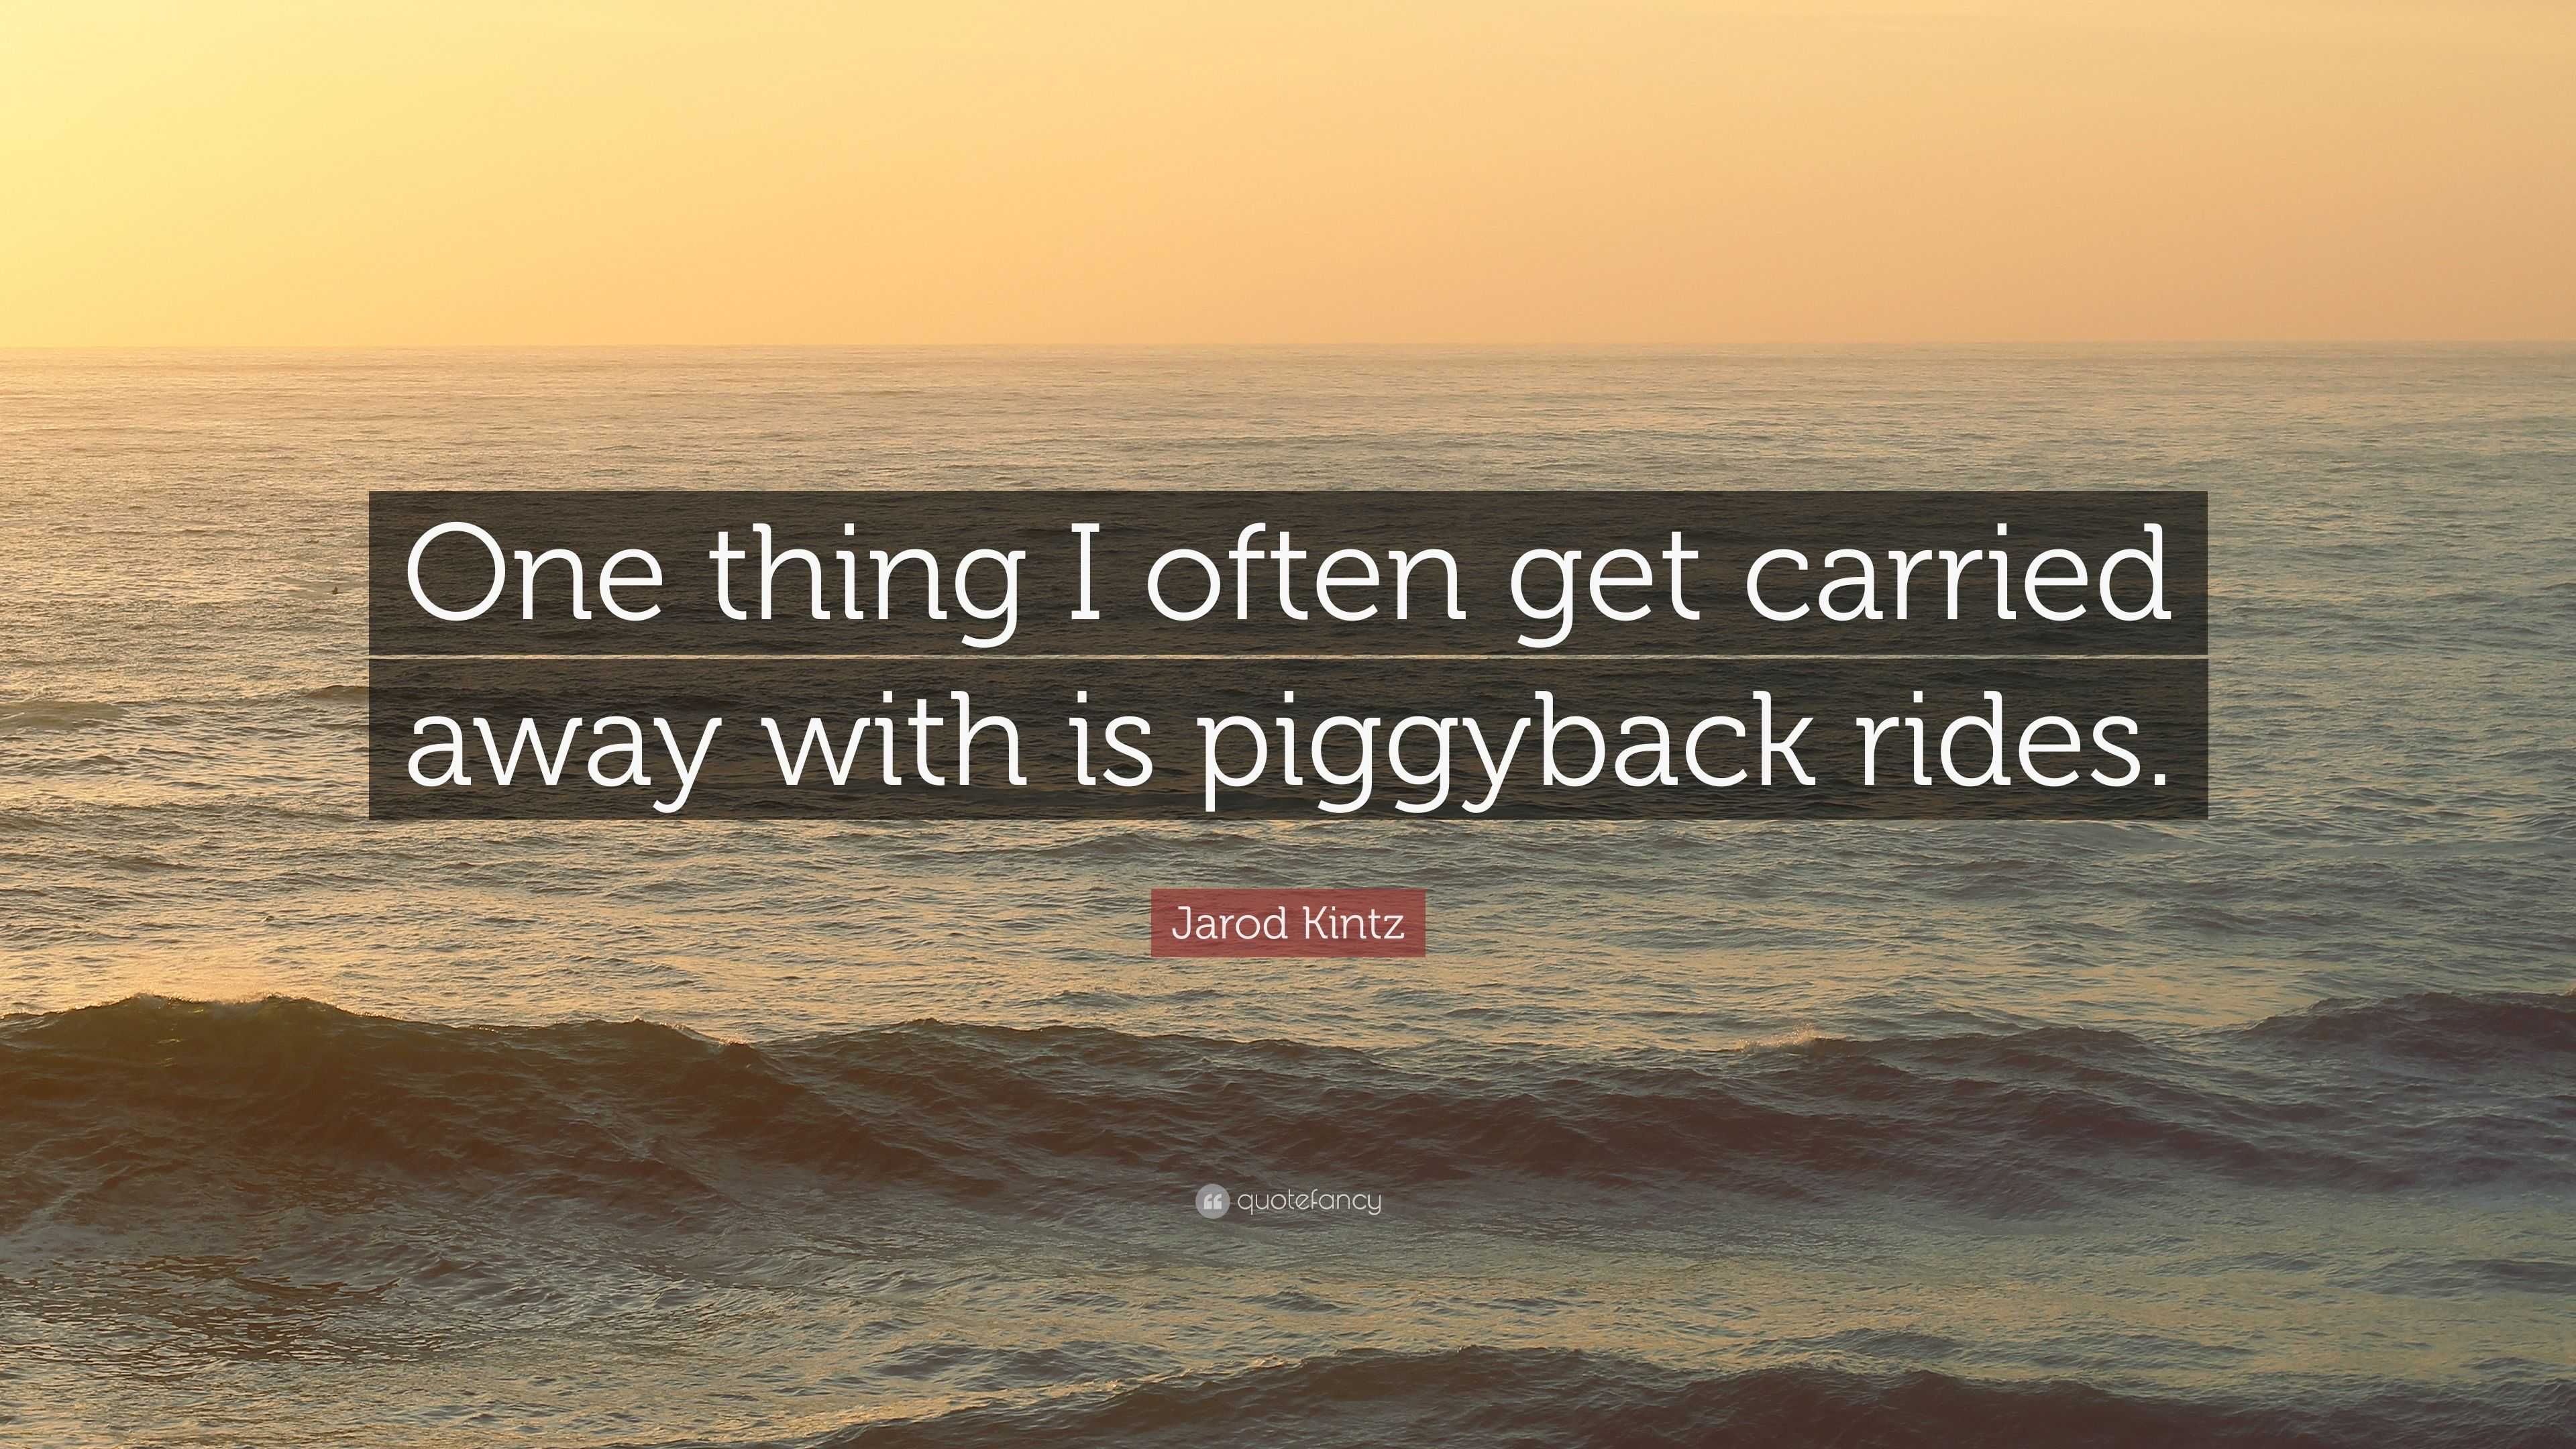 https://quotefancy.com/media/wallpaper/3840x2160/2891886-Jarod-Kintz-Quote-One-thing-I-often-get-carried-away-with-is.jpg